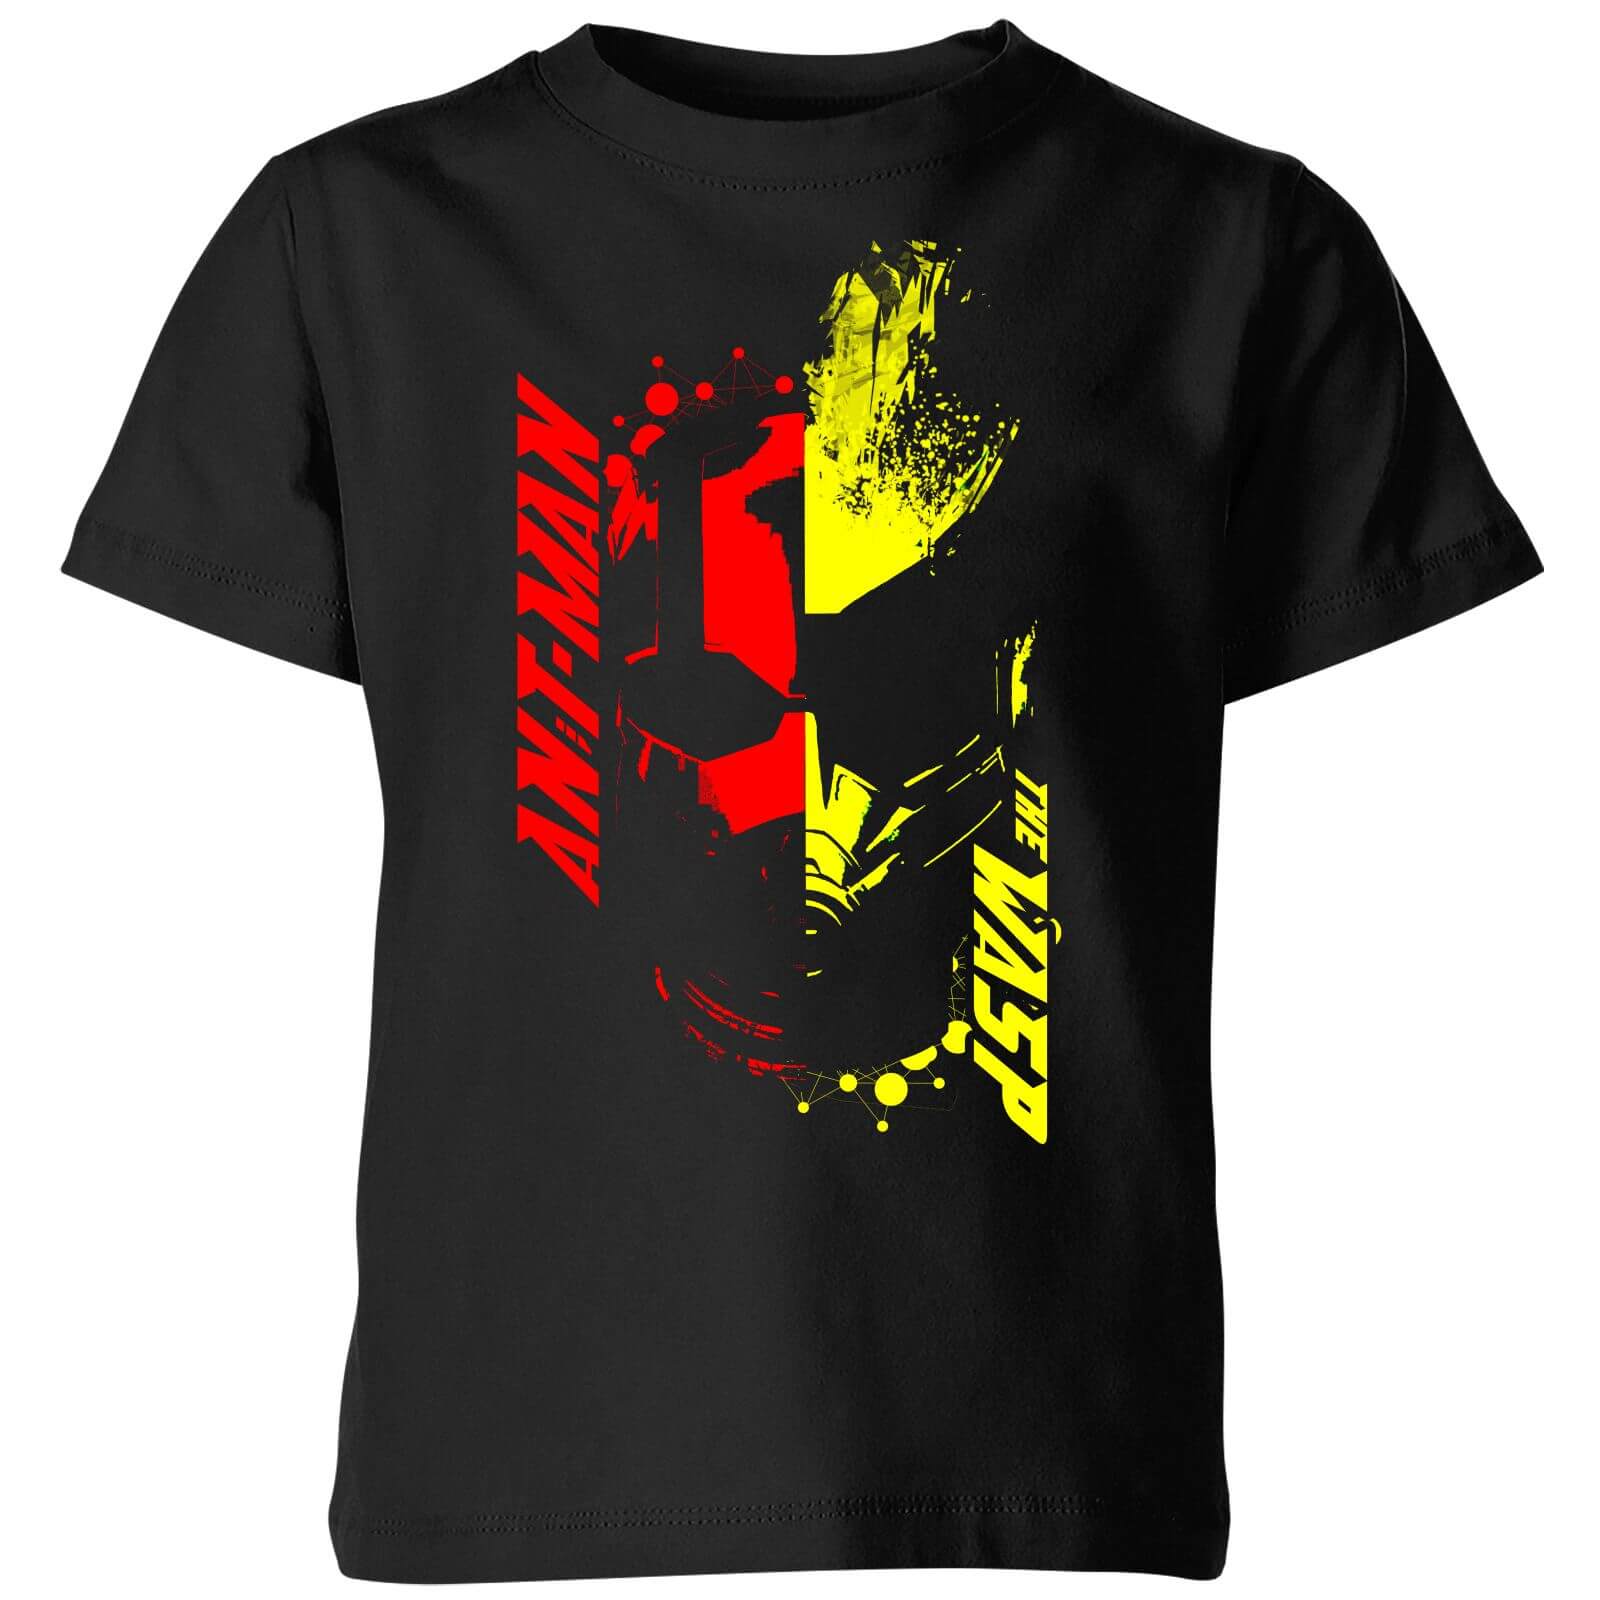 Marvel Ant-Man And The Wasp Split Face Kids' T-Shirt - Black - 3-4 Years - Black